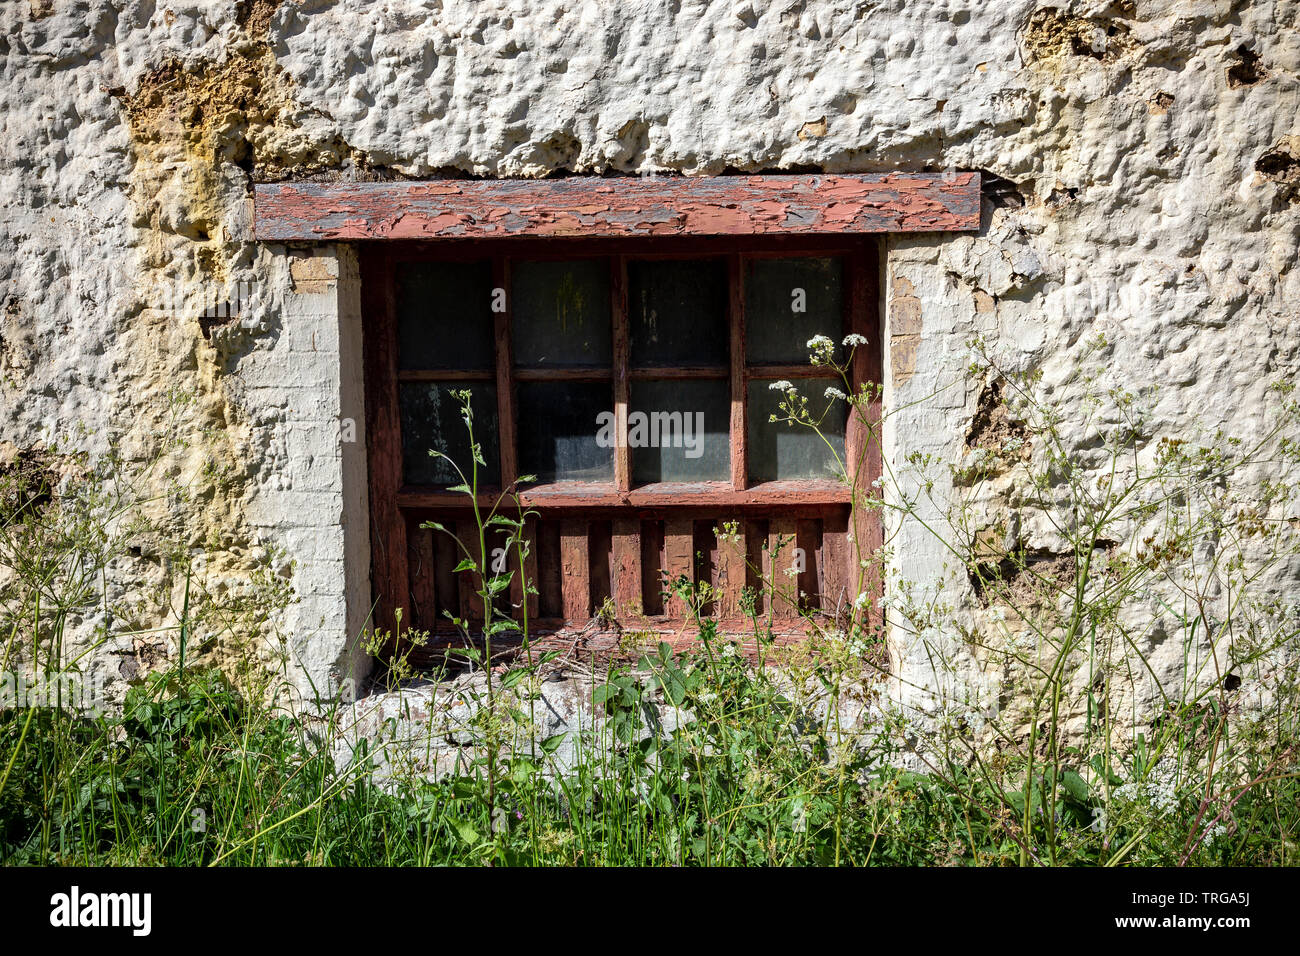 A lintel or lintol and window frame in old barn,Barn, Stone - Object, Stone Material, Devon, Old, Outdoors, Wall - Building Feature, Agricultural Stock Photo